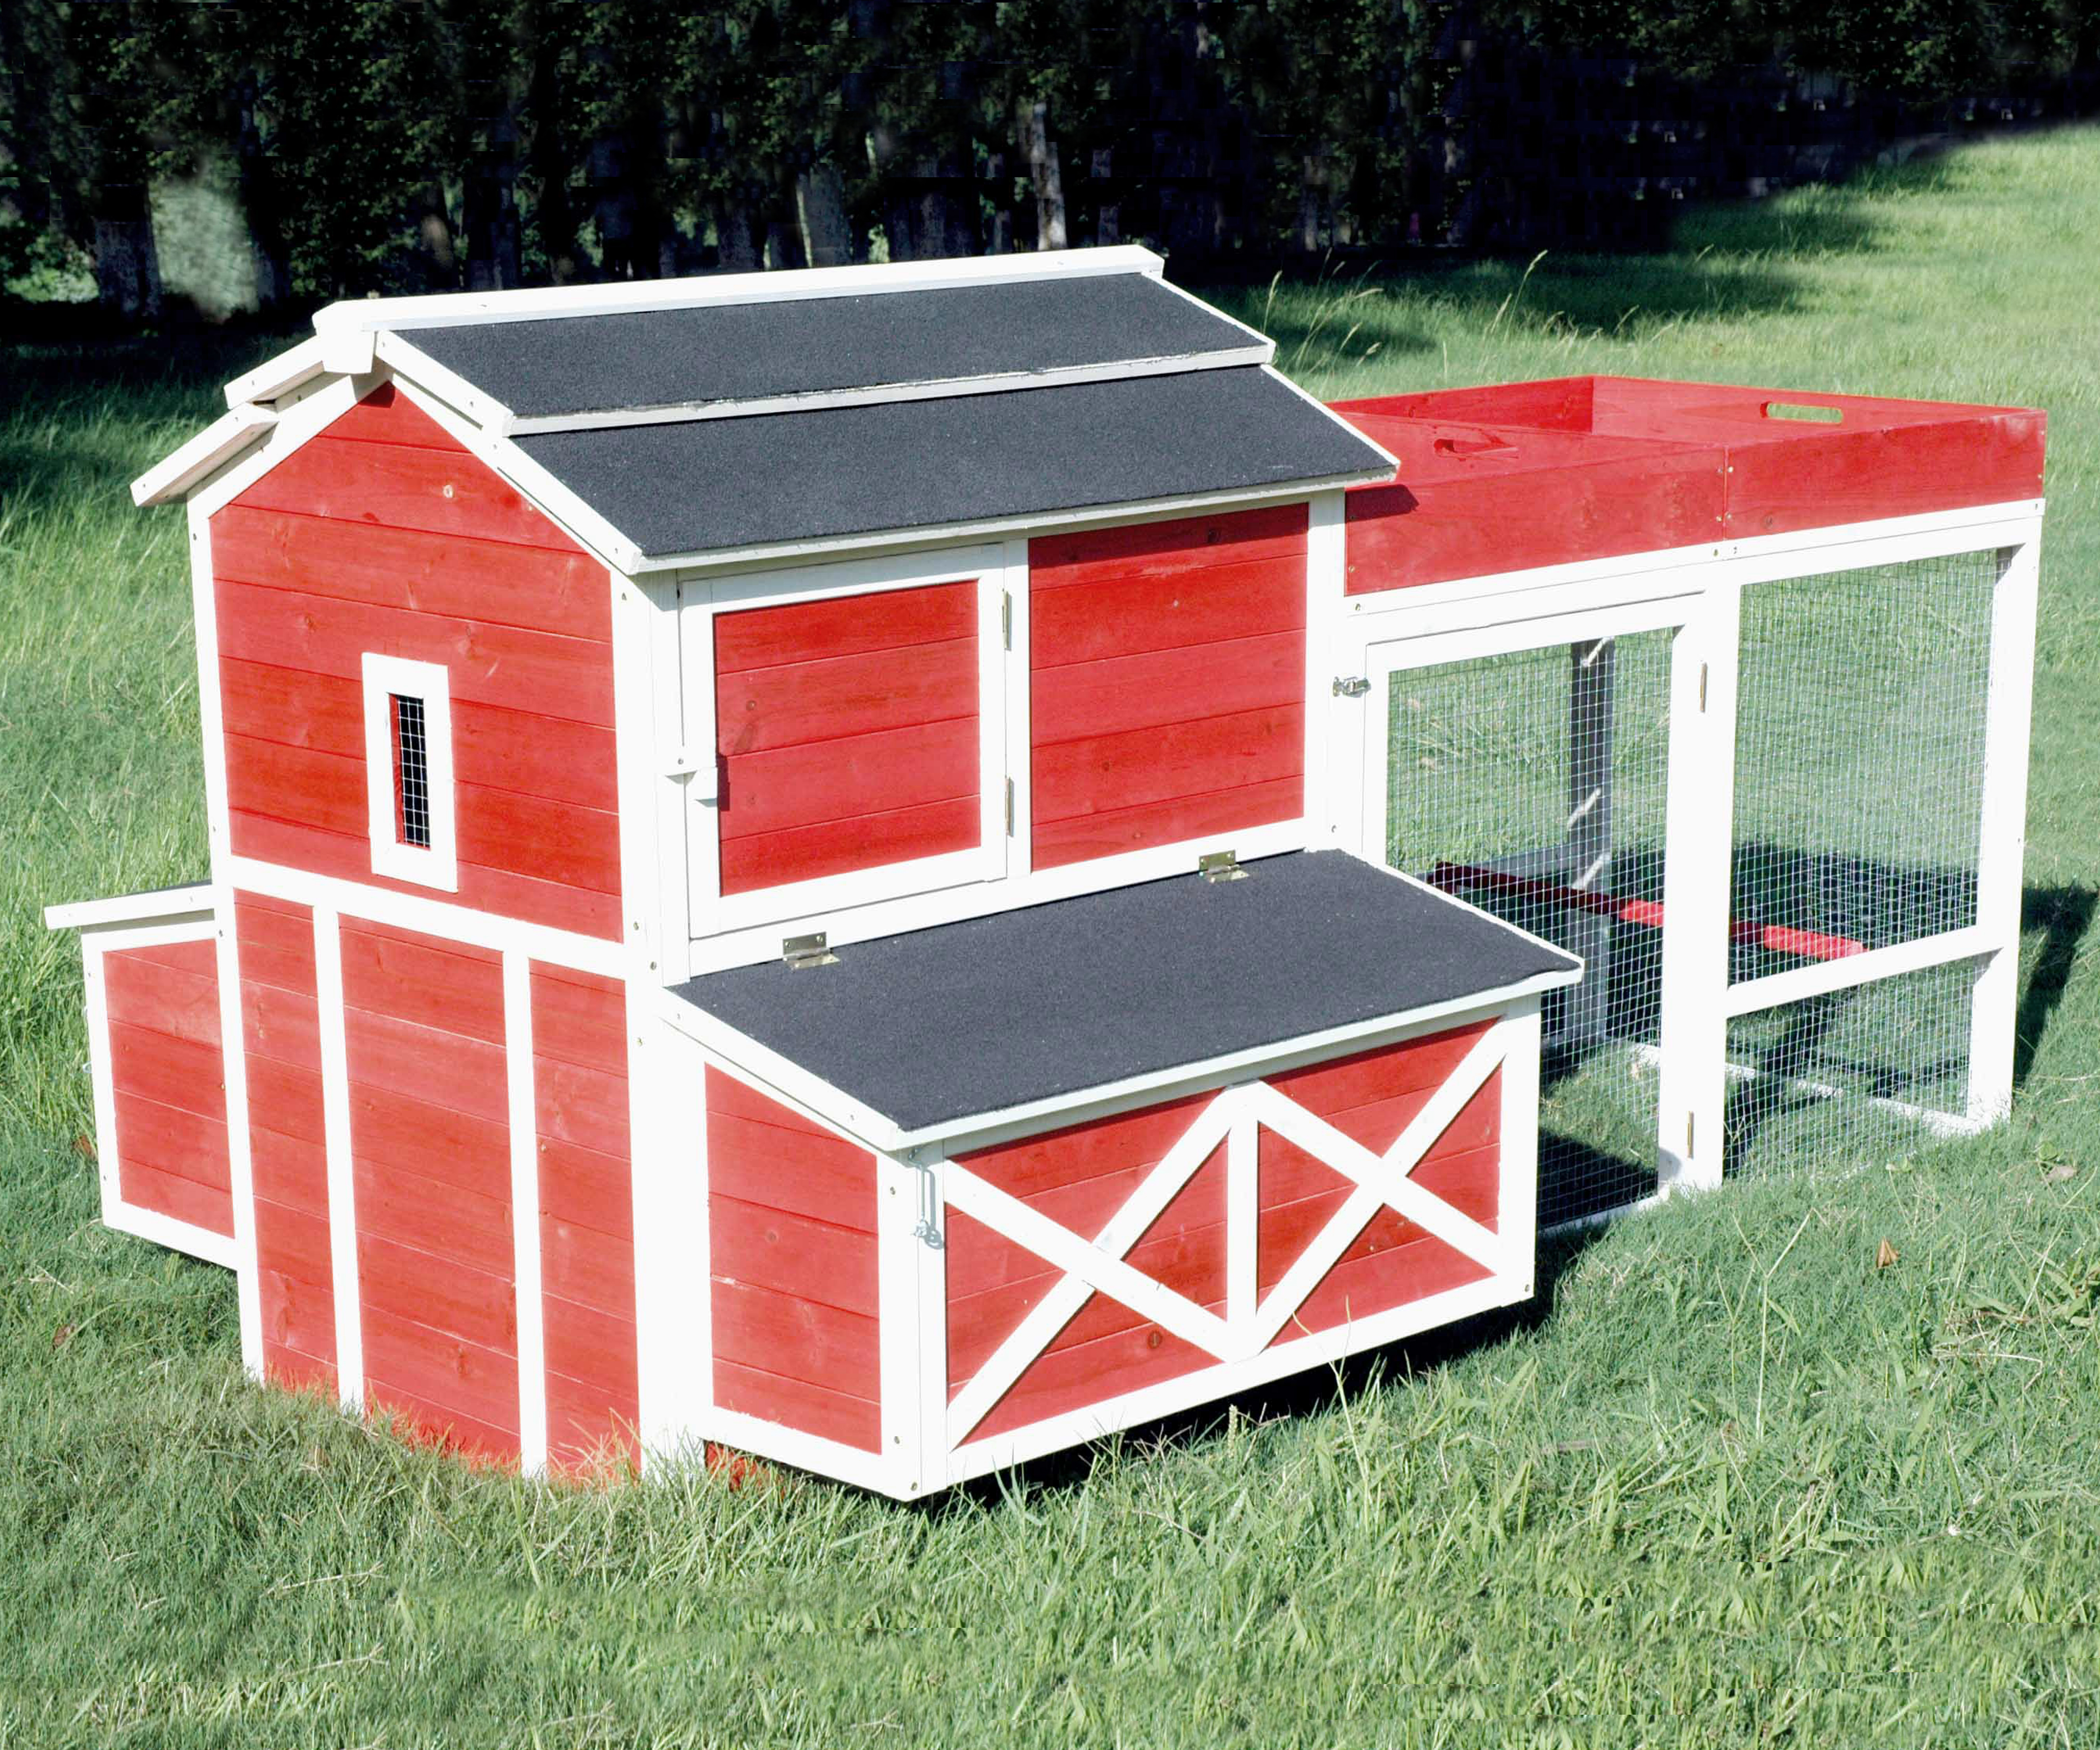 Pth0310010401 Barn Chicken Coop With Roof Top Planter, Red